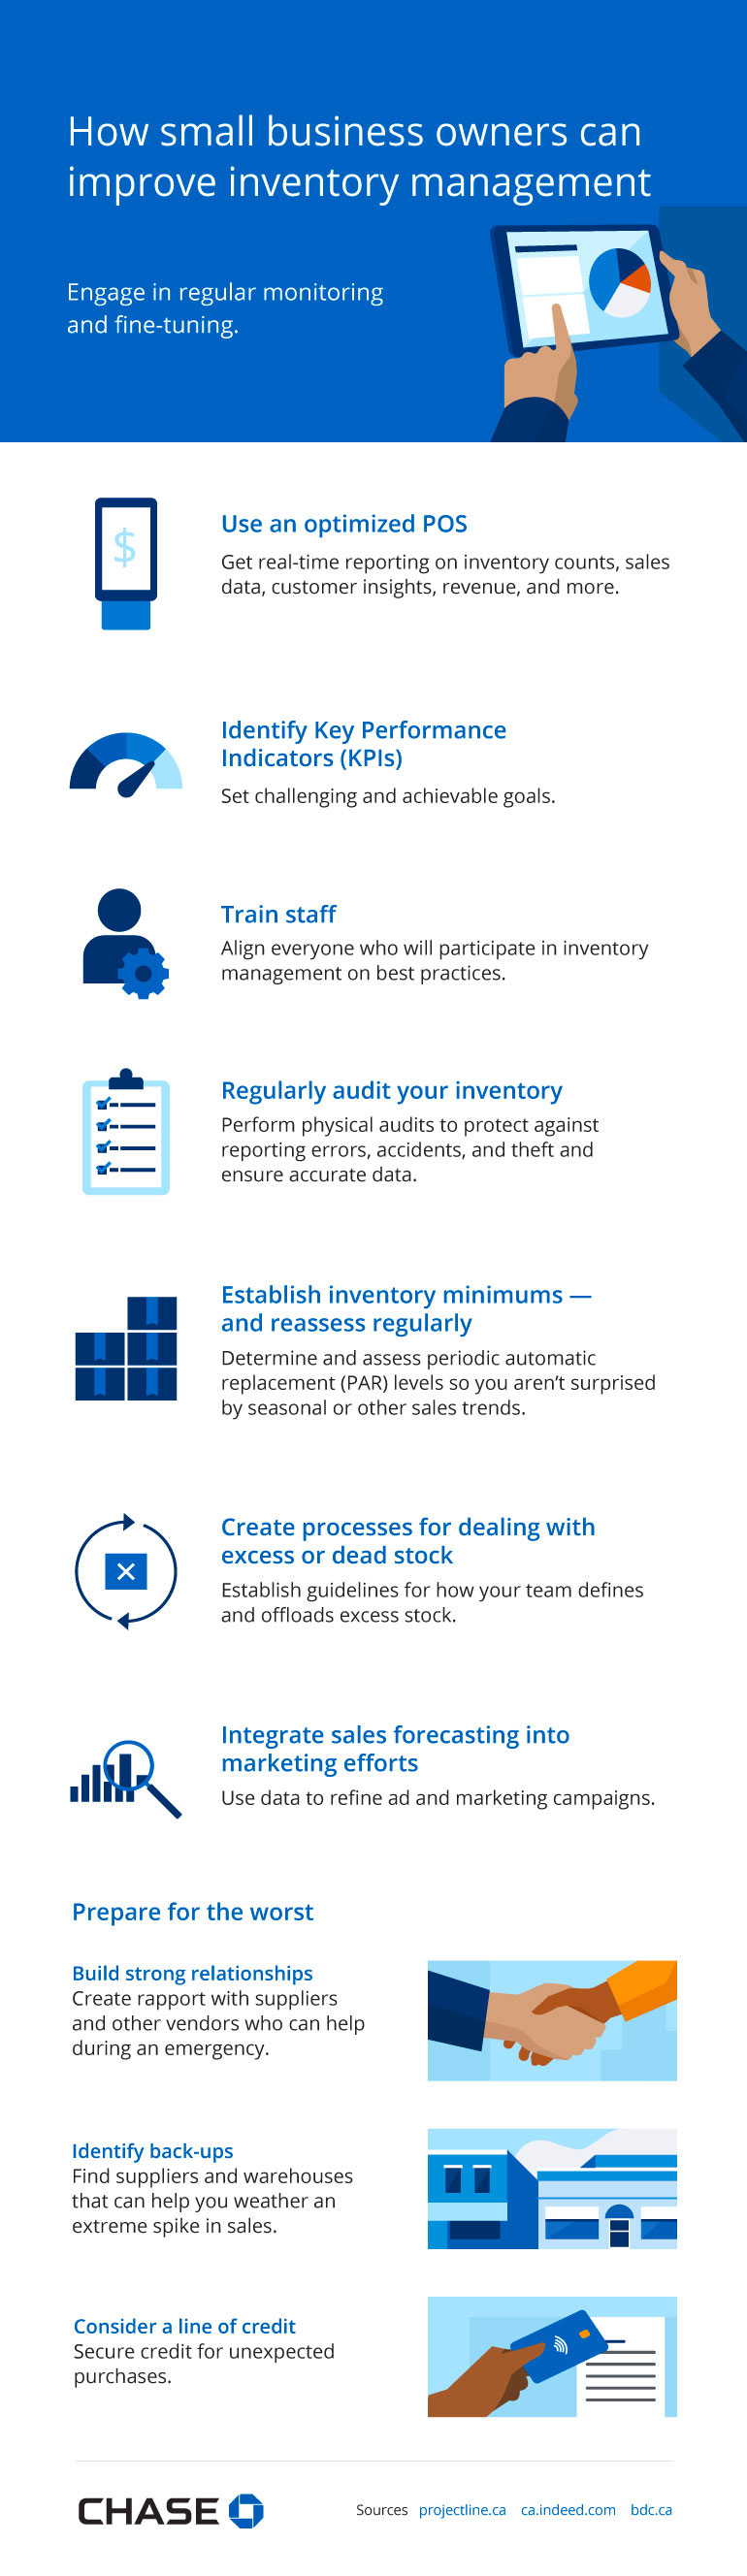 Infographic illustrating how small business owners can improve inventory management